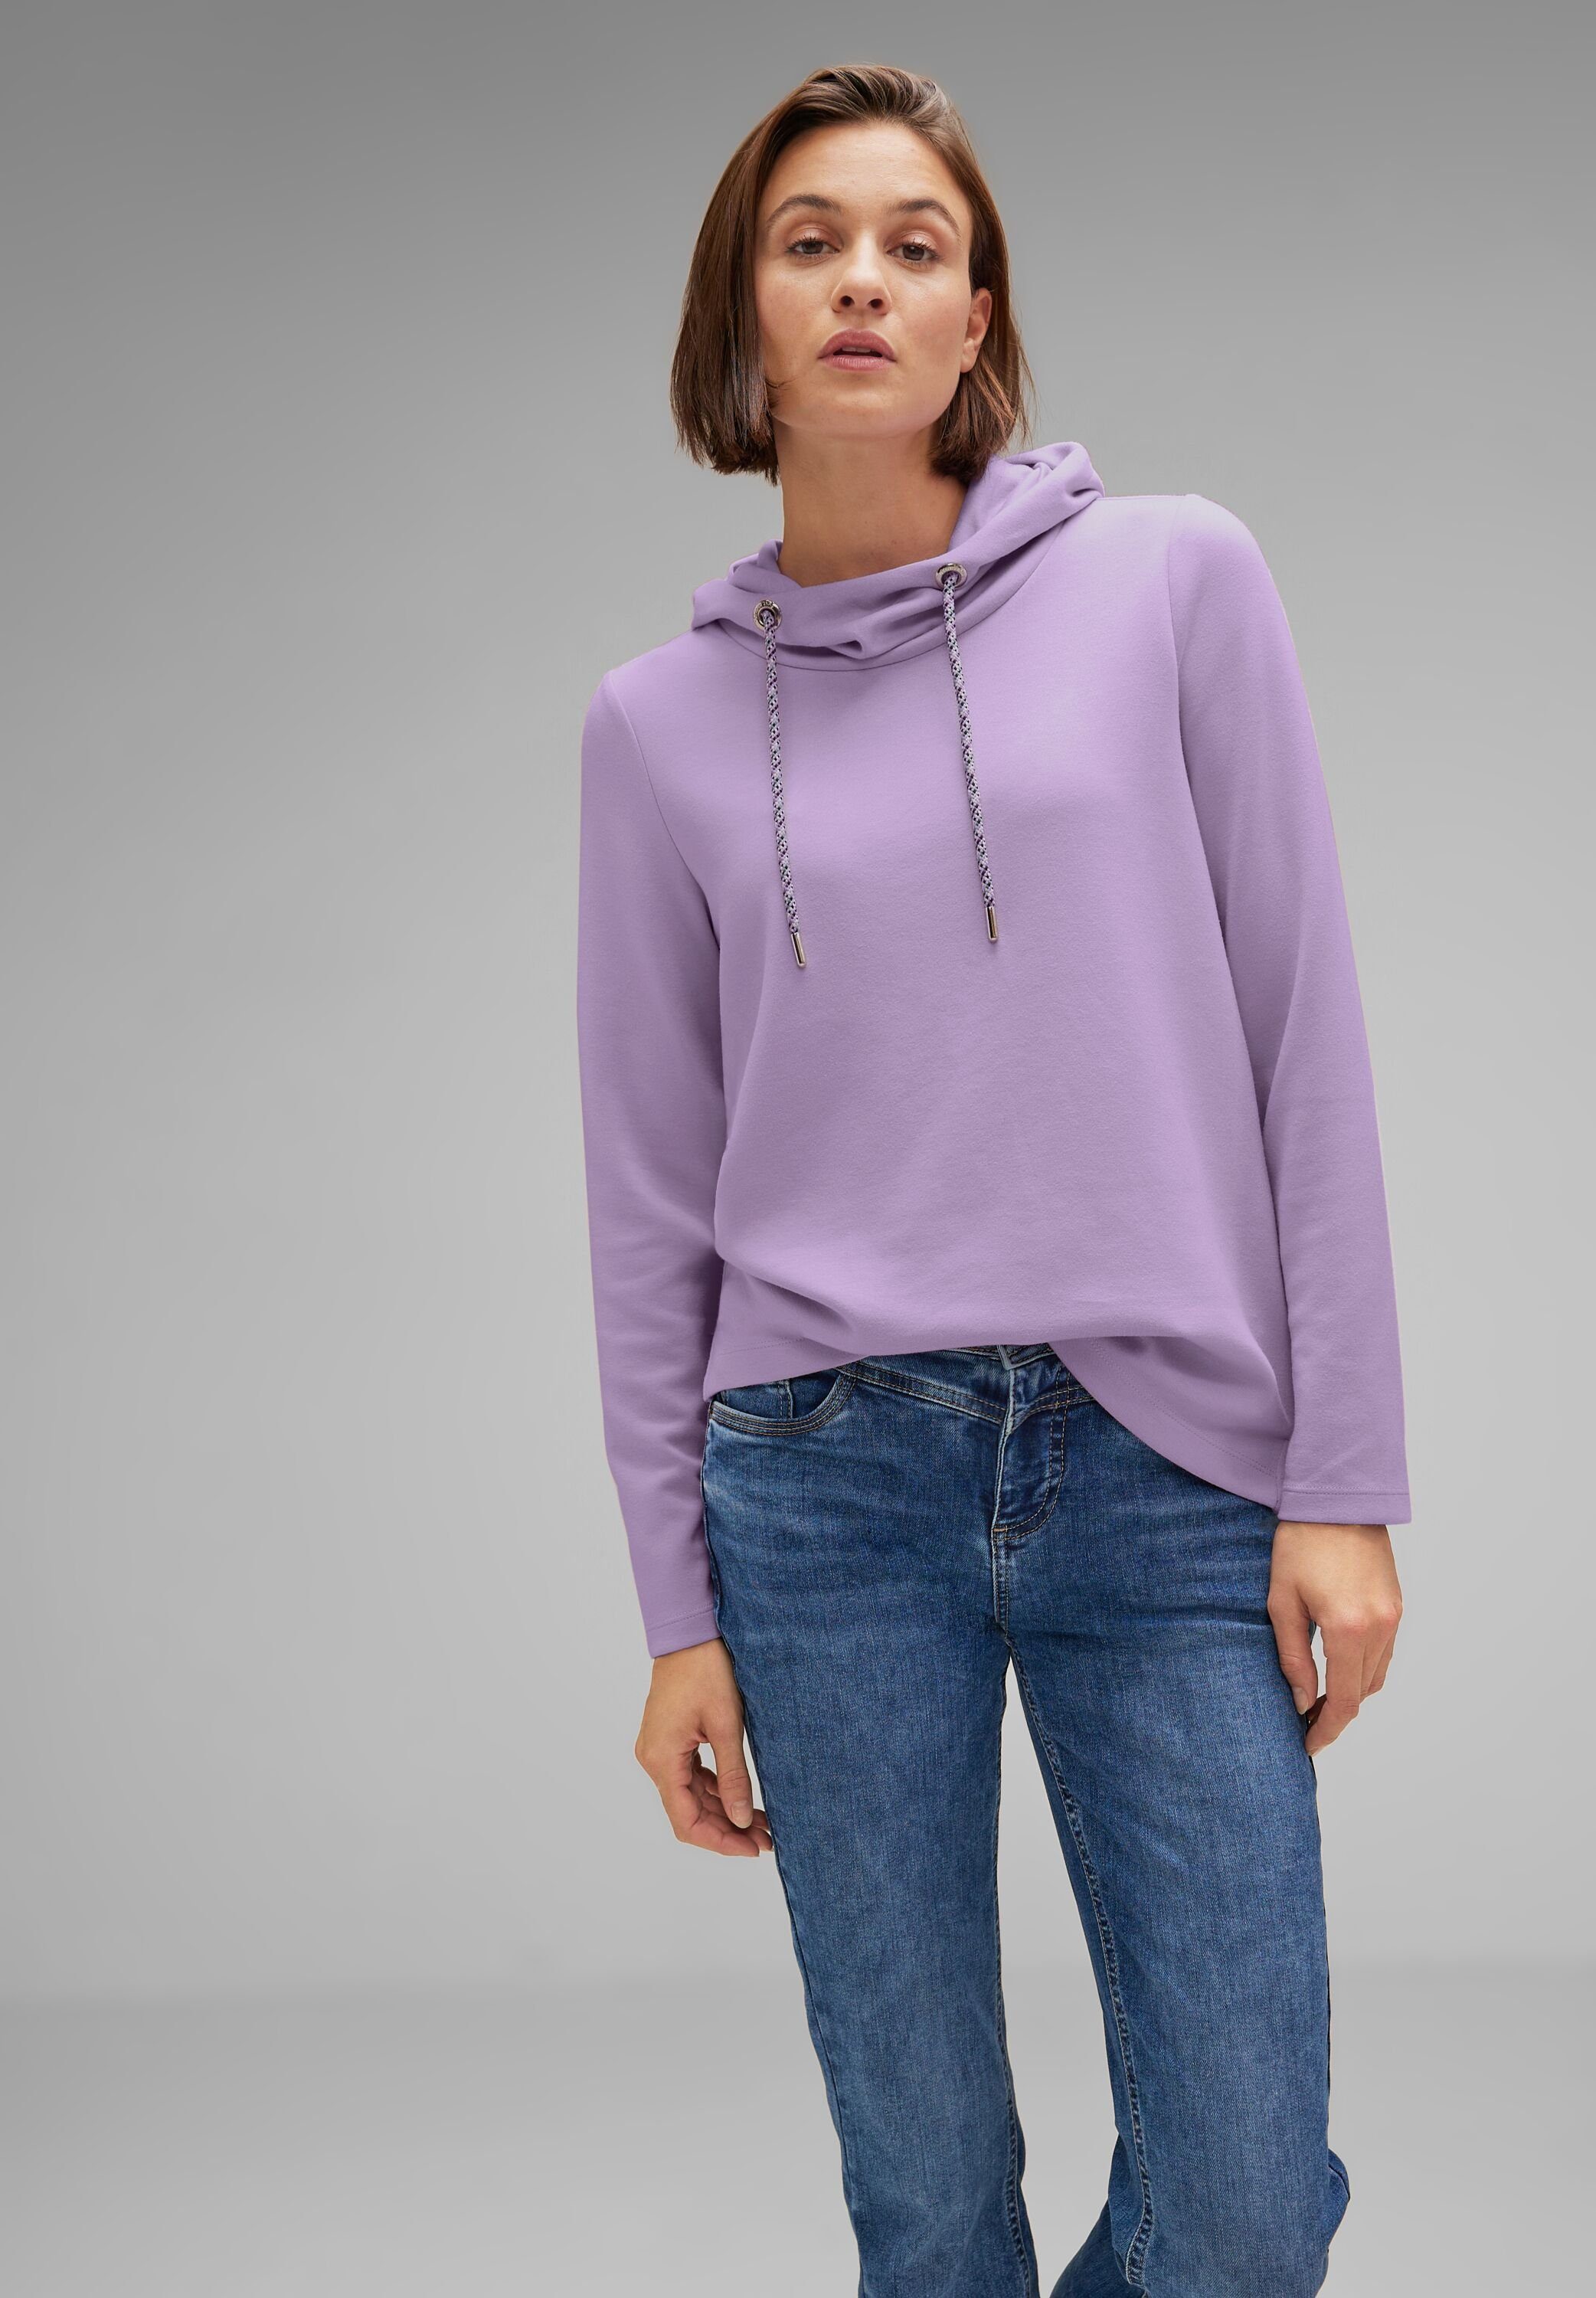 ONE pure STREET soft lilac Strickpullover